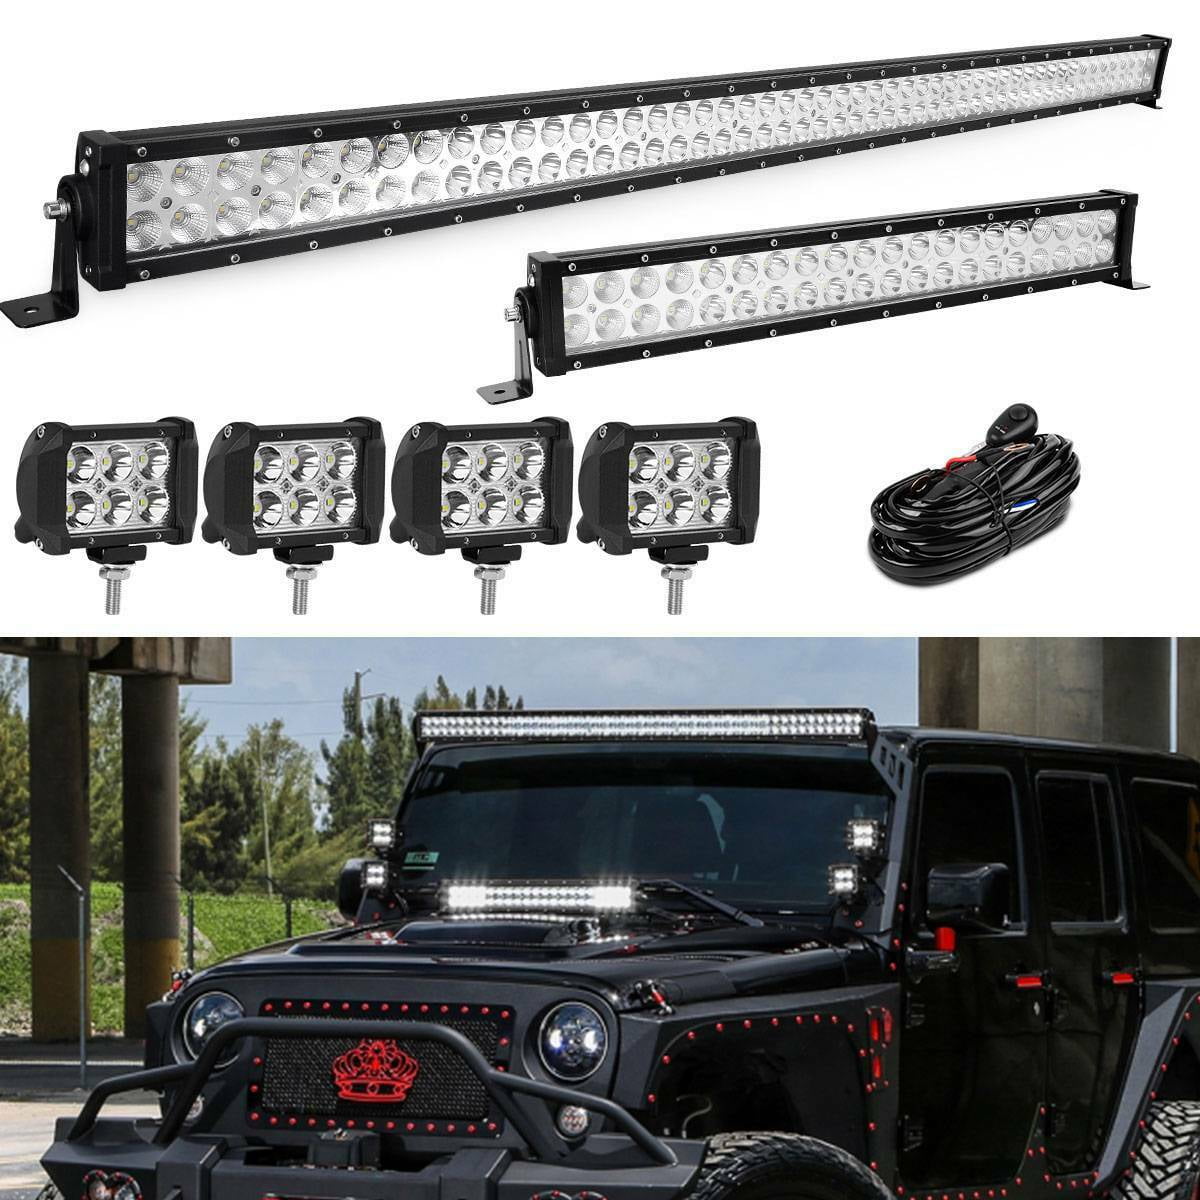 YITAMOTOR 22inch LED Light Bar Spot Flood Combo 2X 4 Pods Offroad Compatible with Jeep Truck SUV